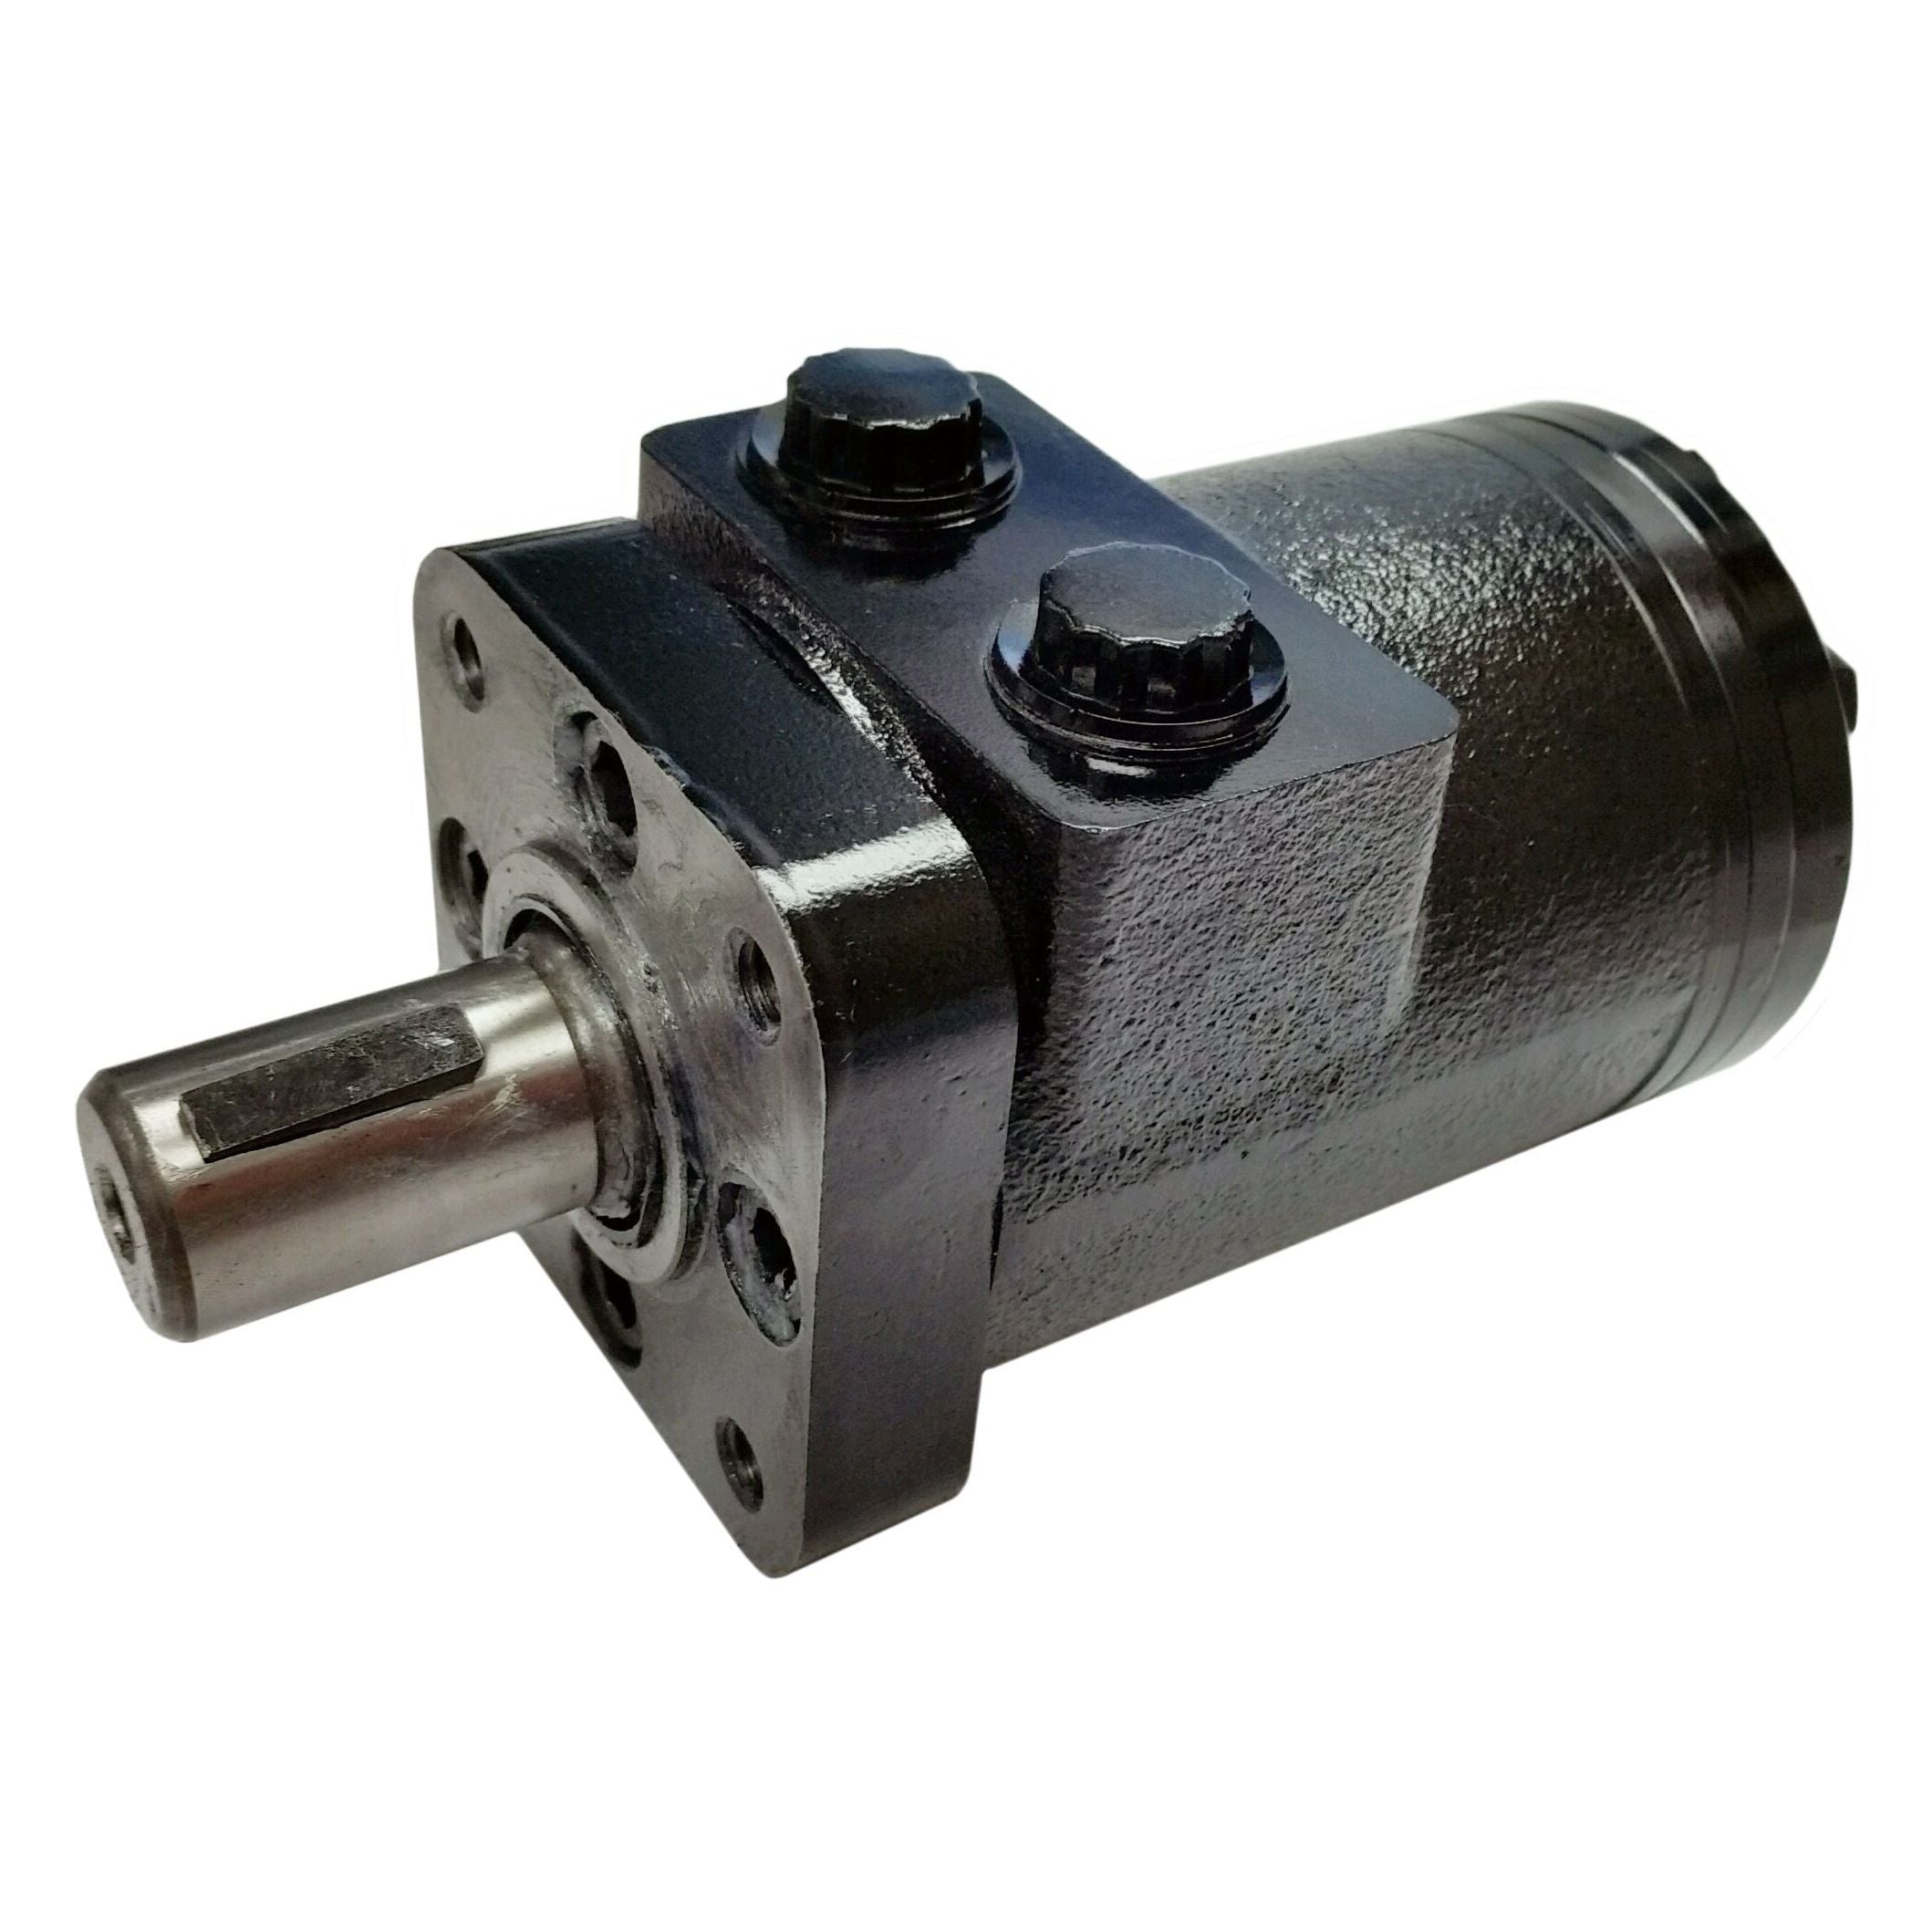 BMPH-36-H4-K-F : Dynamic LSHT Motor, 36cc, 1500RPM, 487in-lb, 1813psi Differential, 14.53GPM, SAE A 4-Bolt Mount, 1" Bore x 1/4" Key Shaft, Side Ported, Manifold